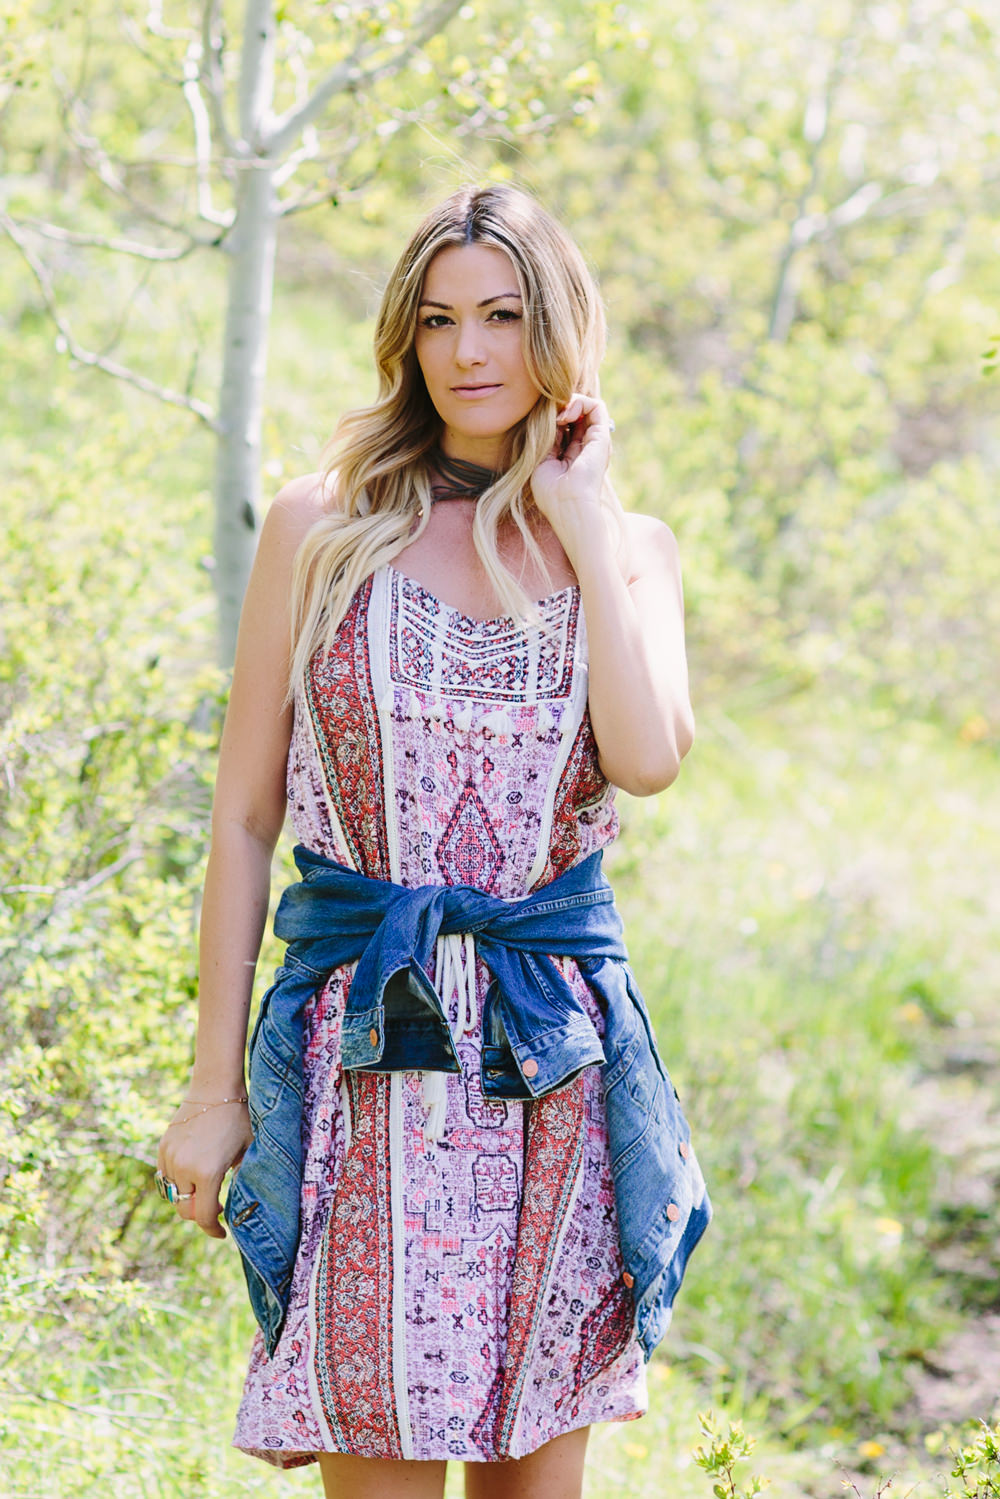 Dash of Darling styles a Lucky printed cotton dress with a denim jacket for summer.